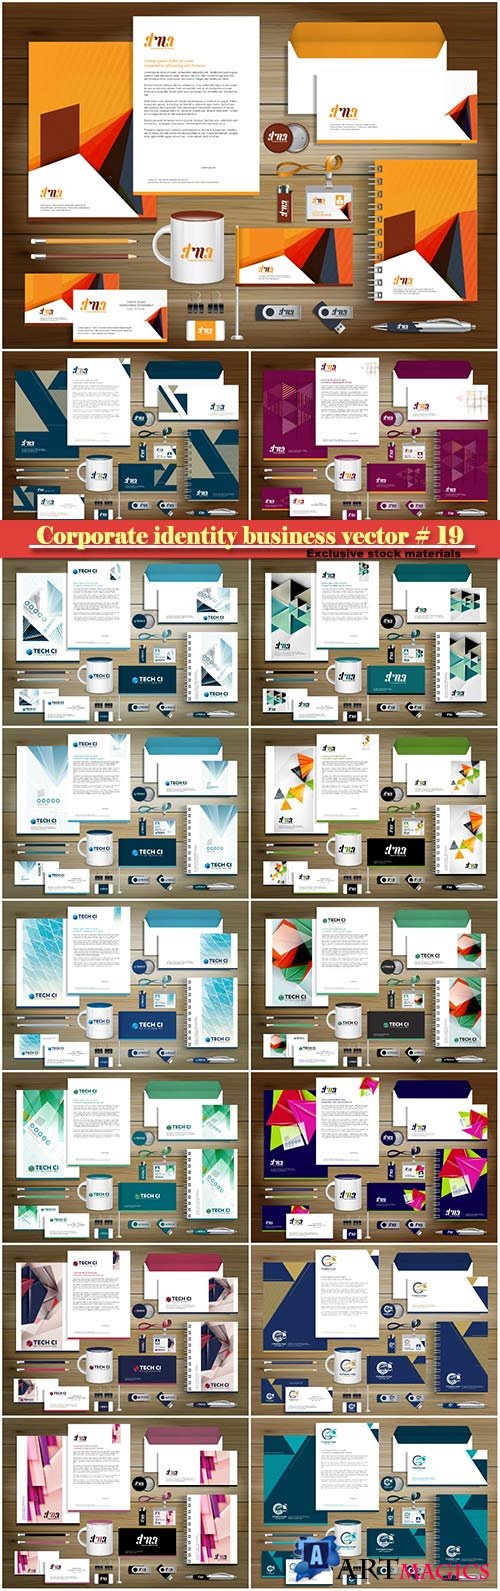 Corporate identity business vector # 19